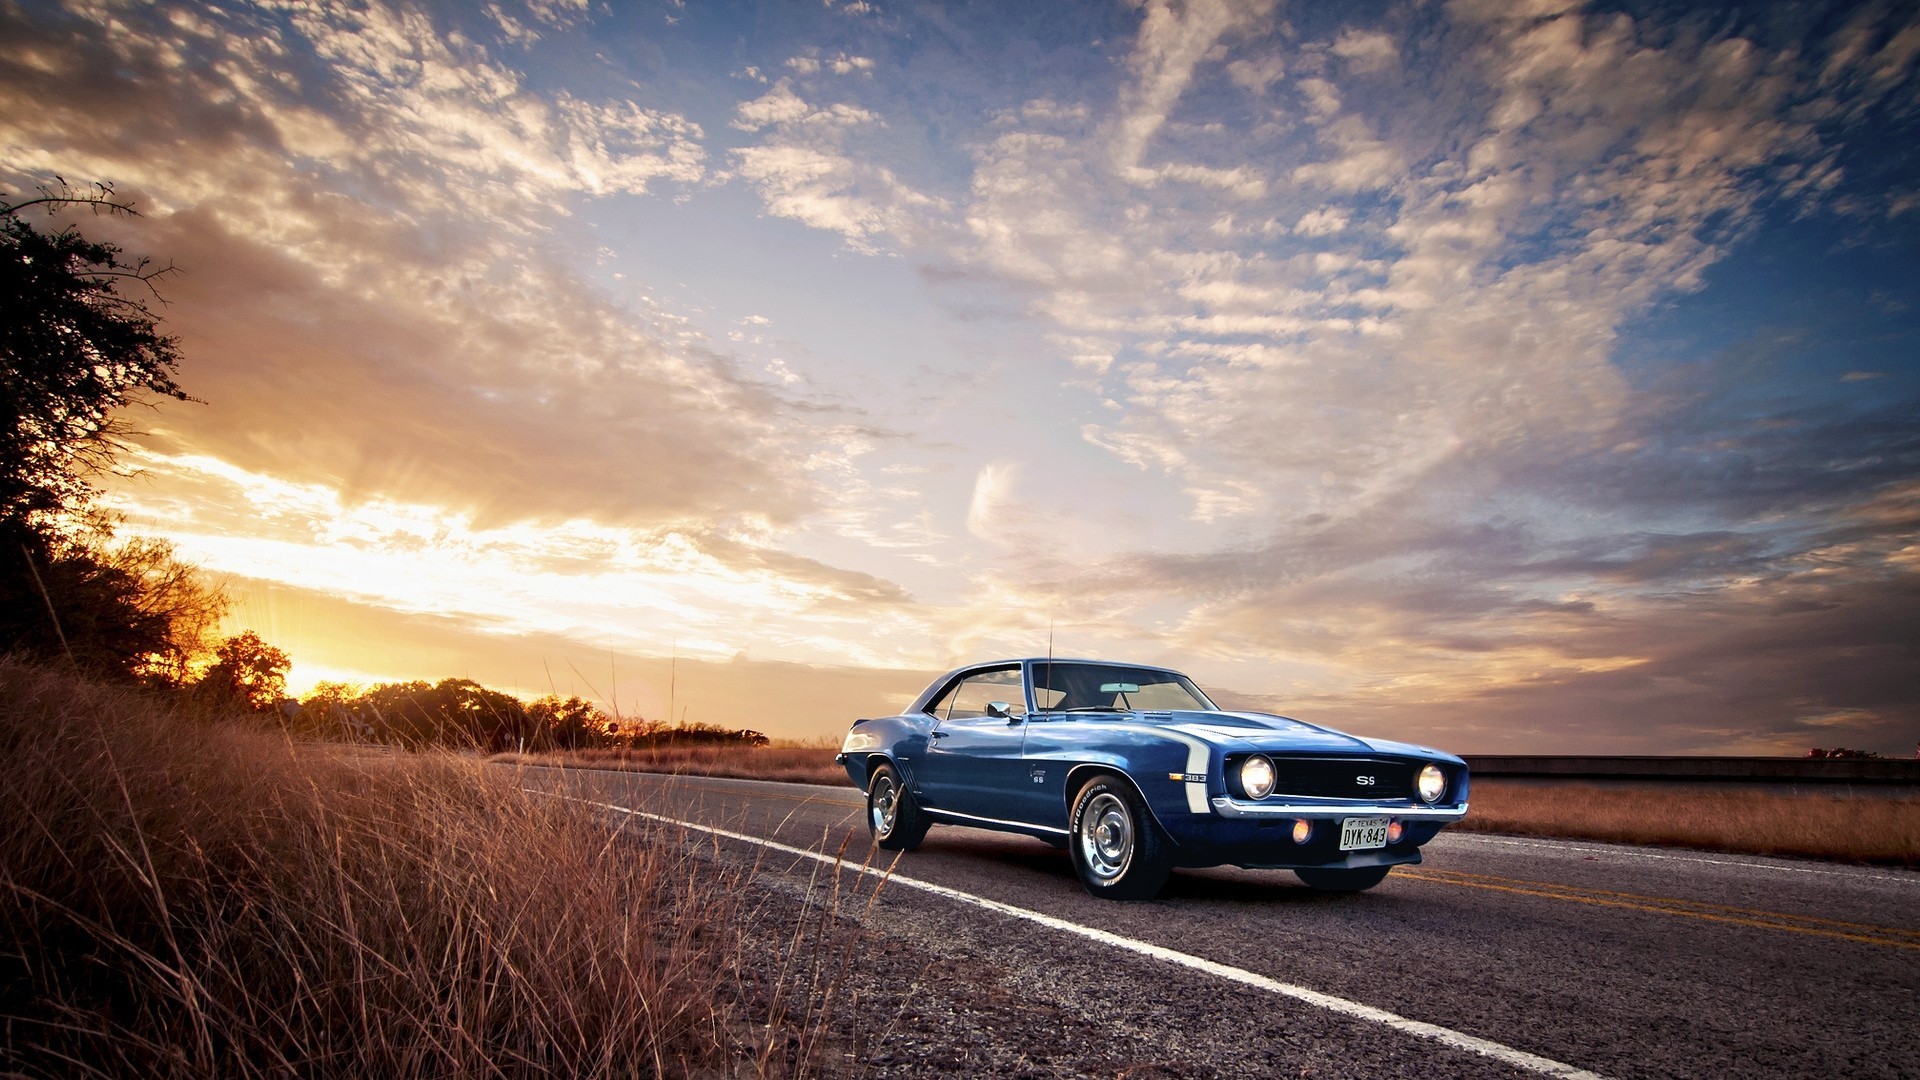 Sports Car Car Chevrolet Camaro SS Muscle Cars Blue Cars Dusk Sunlight Road Vehicle Numbers 1920x1080